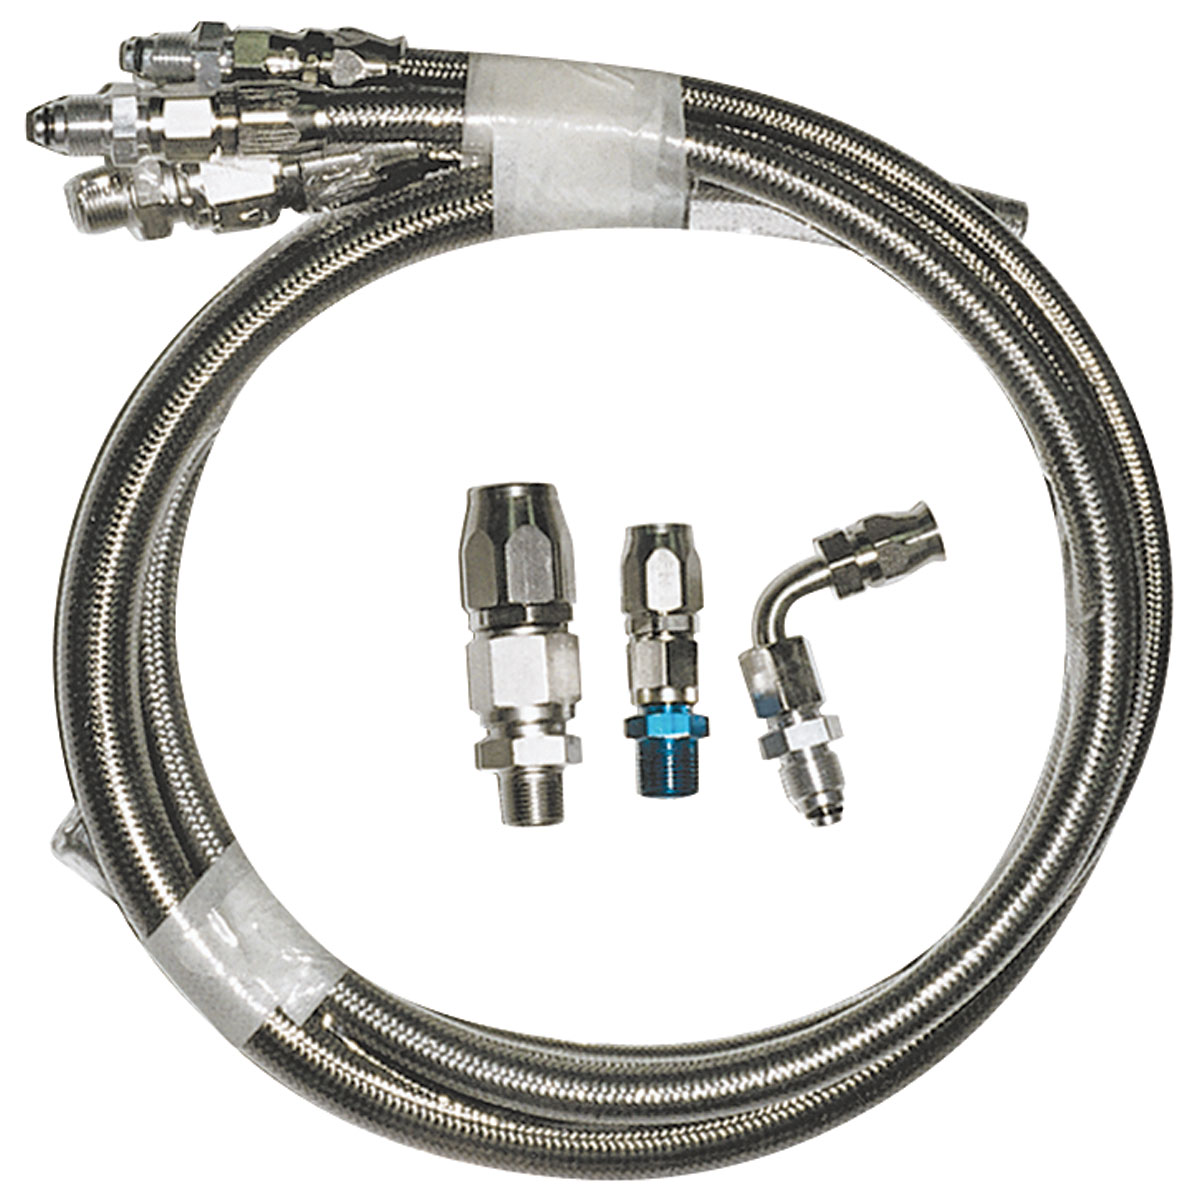 Hose, Power Steering, GM Cars, Braided, March Performance @